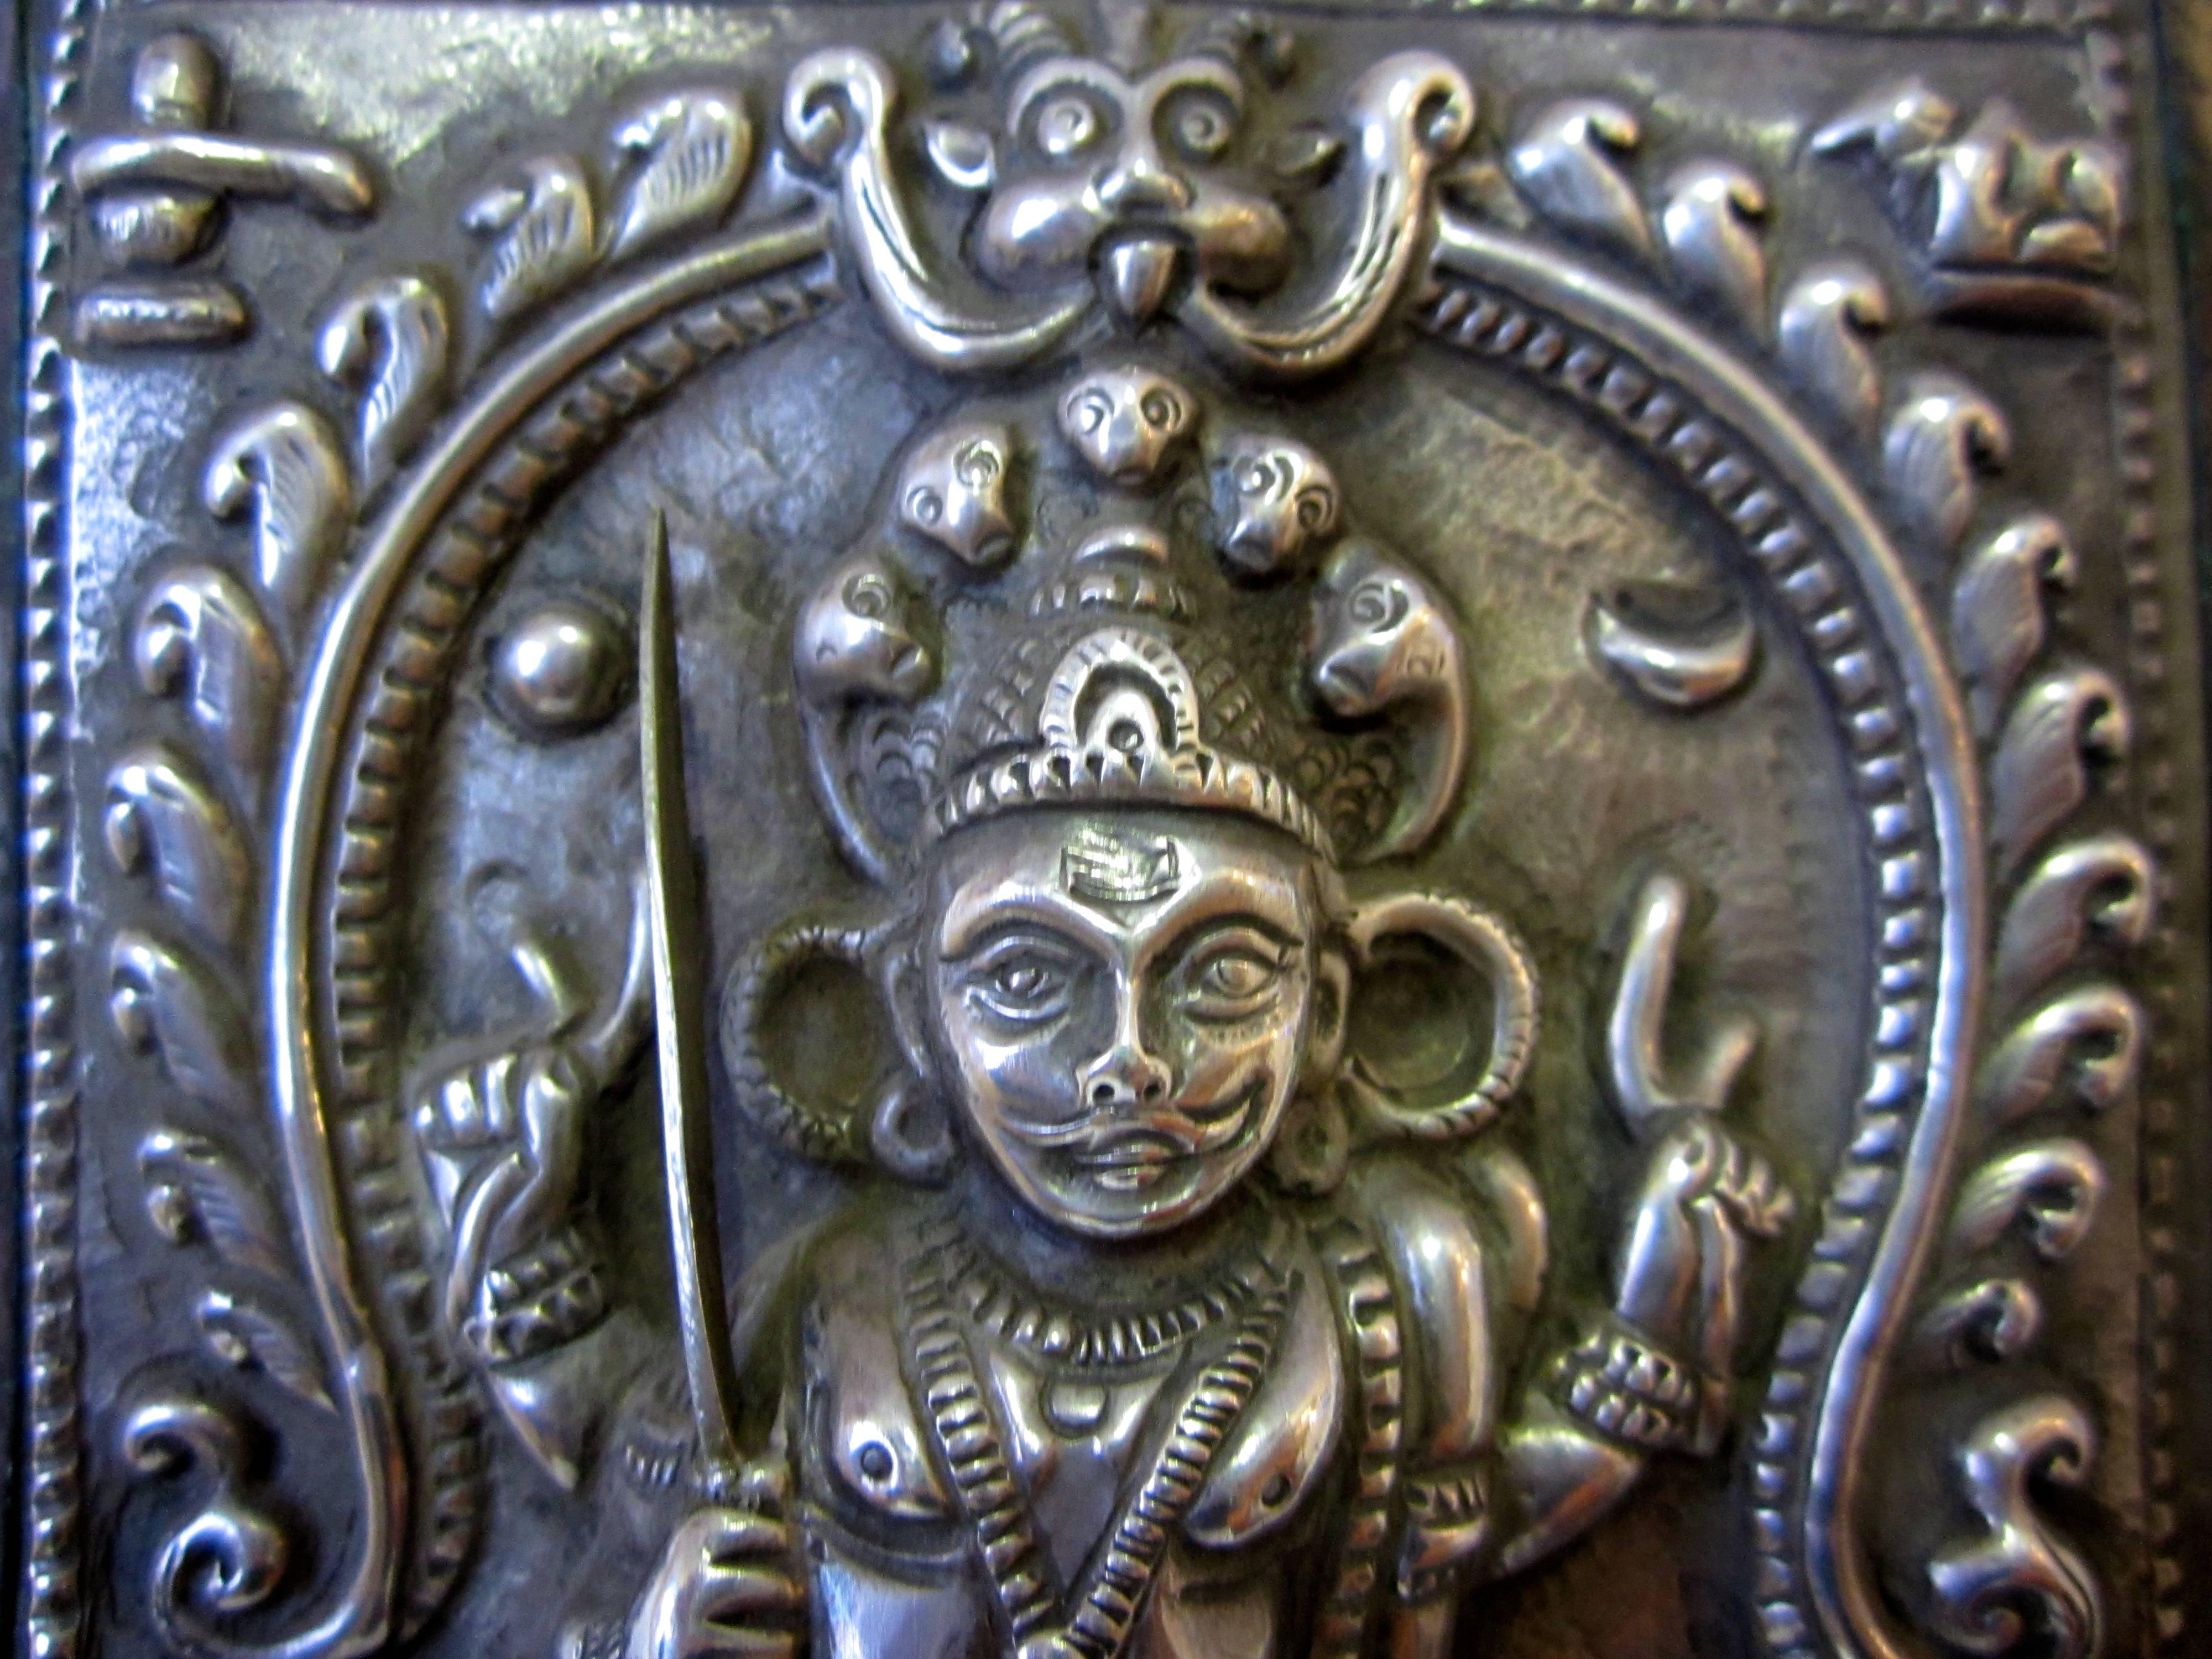 Indian silver and copper ritual plaque from Karnataka.
The Hindu warrior god Virabhadra is standing and holding sword, mace and shield. Two attendants are at the side.